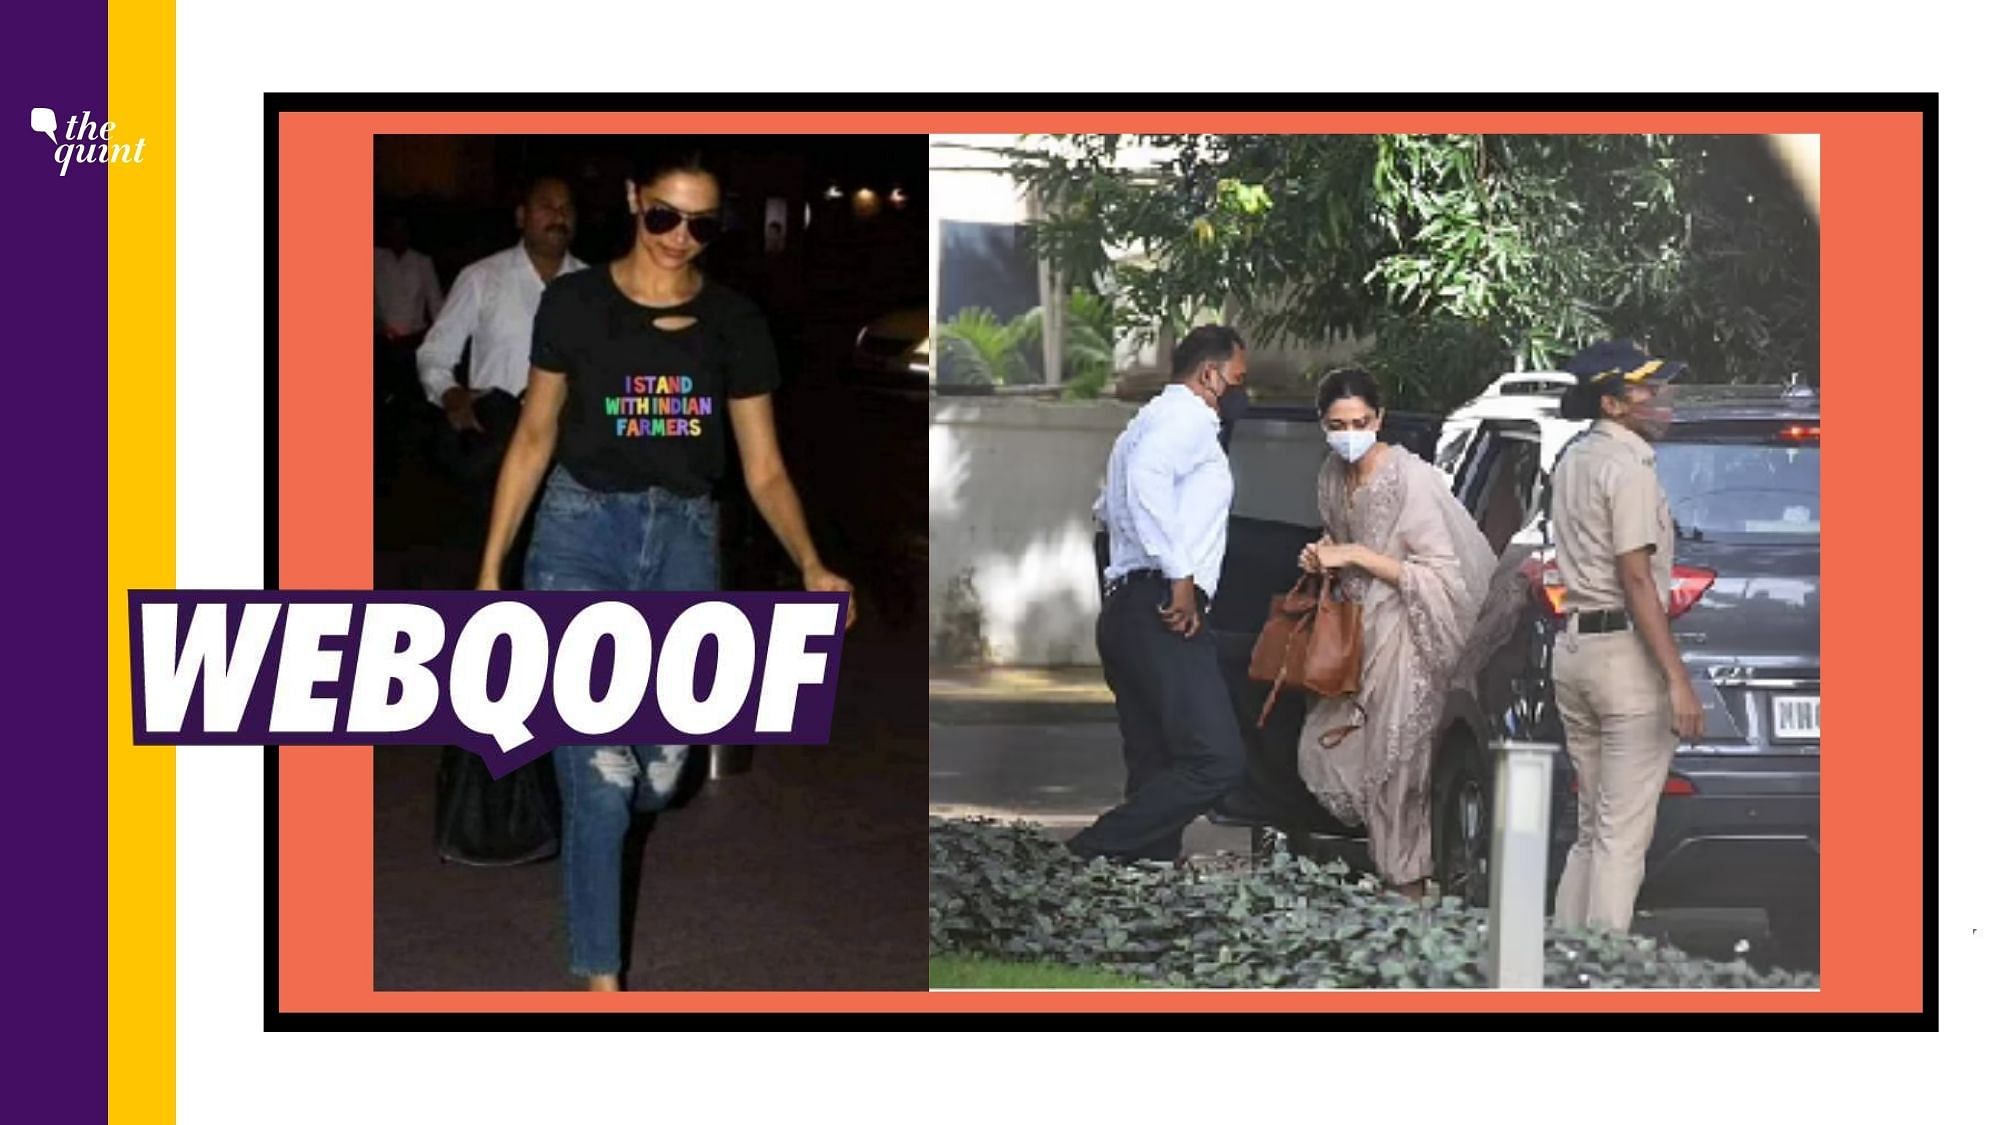 An old image has been edited to claim that Deepika Padukone wore a T-shirt extending support to farmers on the day NCB questioned her.